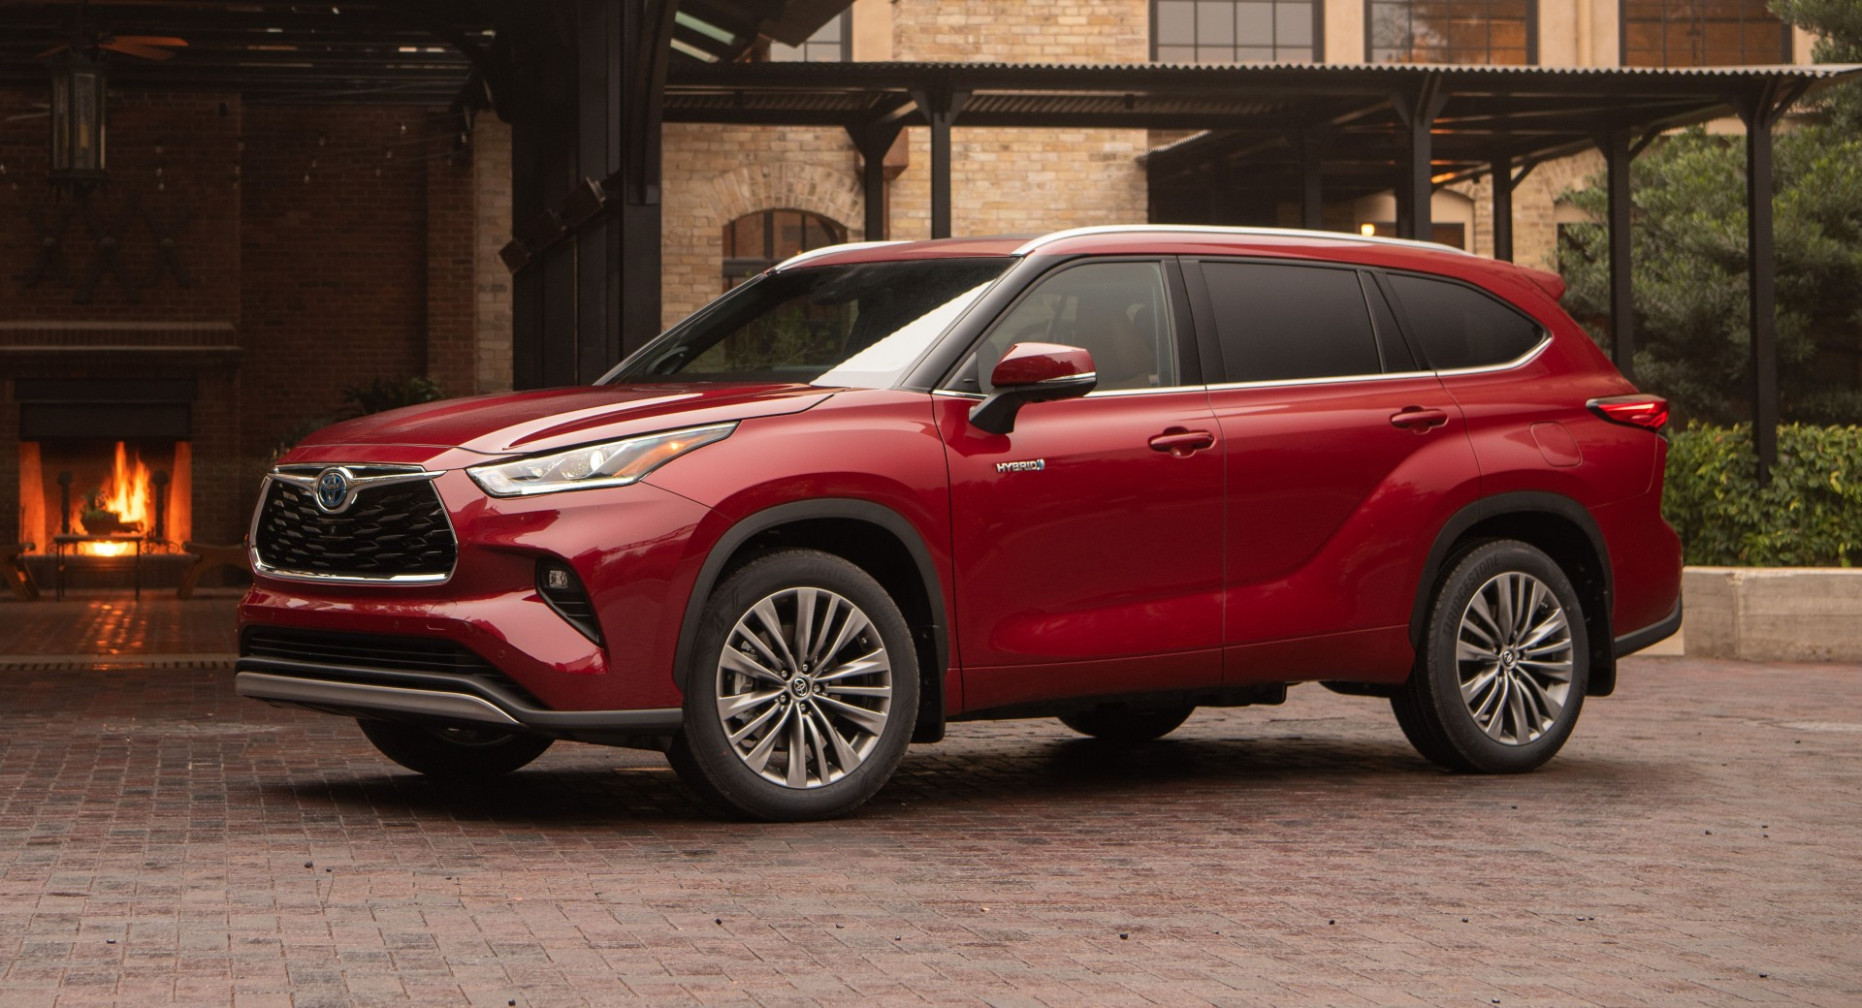 Reviews When Will 2023 Toyota Highlander Be Available